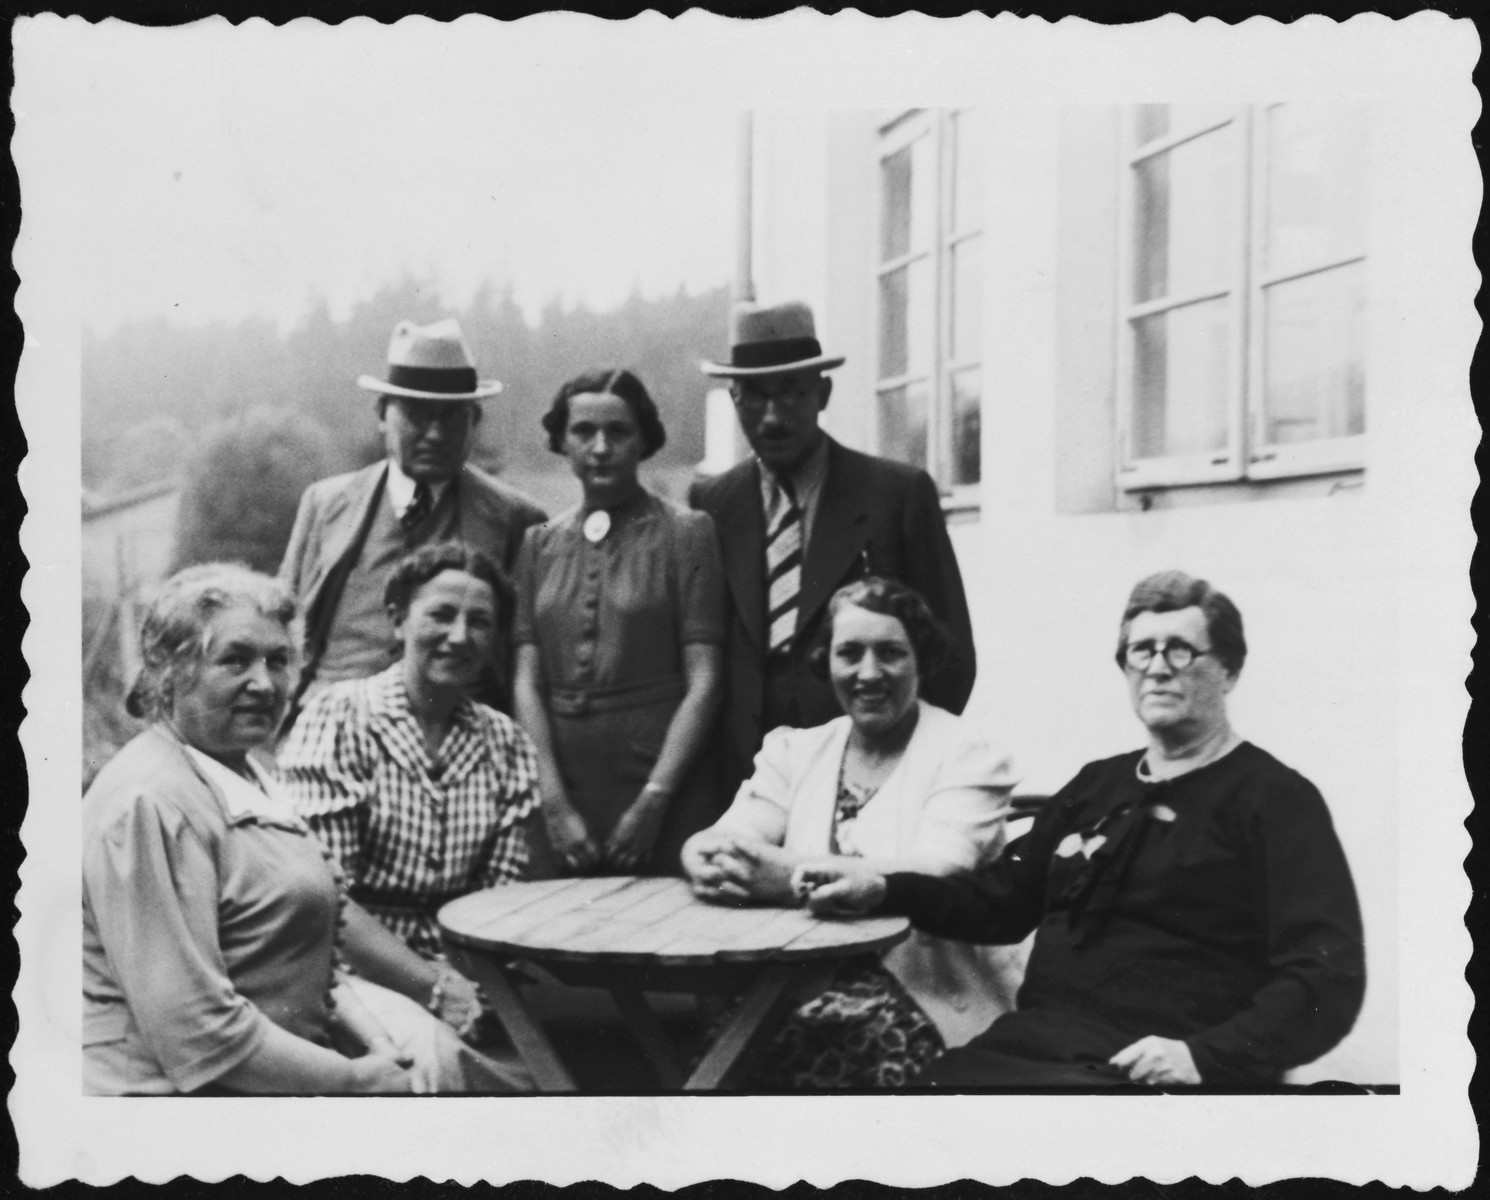 Family Vacation.

Pictured are family members of Rita Blumstein.